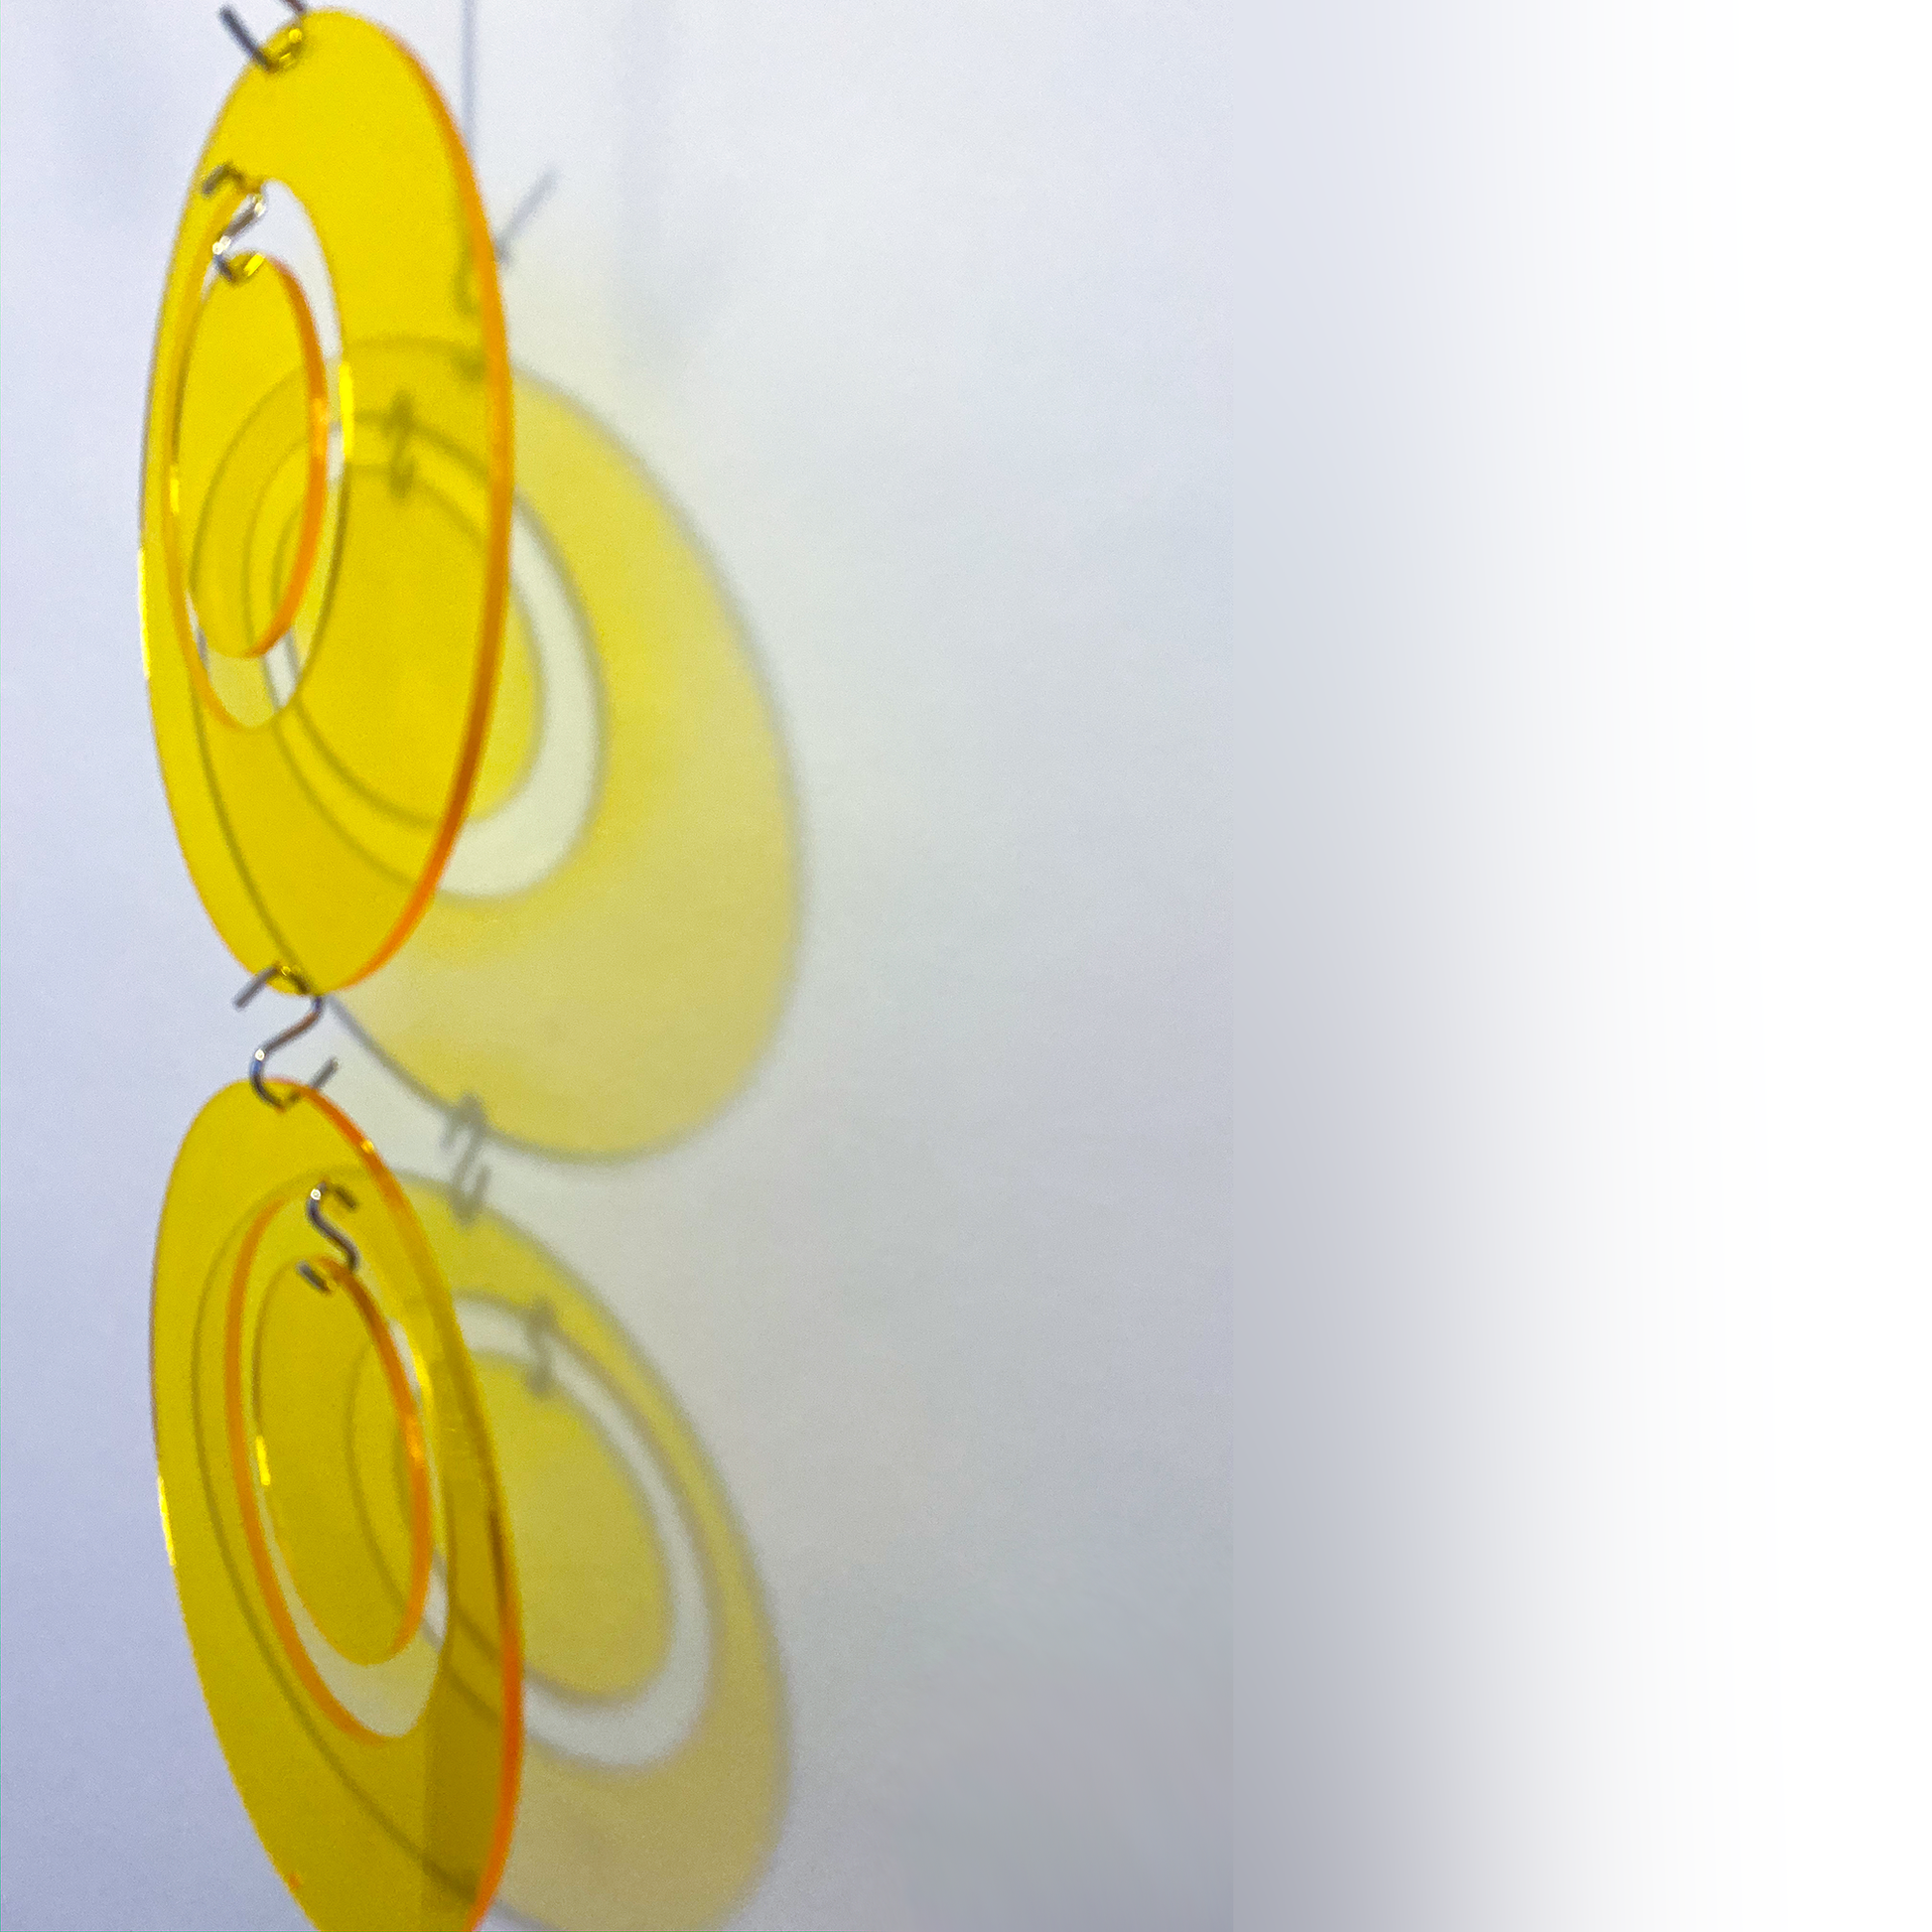 Yellow Groovy Atomic Kits Part for Room Dividers, Wall Art, and Mobiles by AtomicMobiles.com